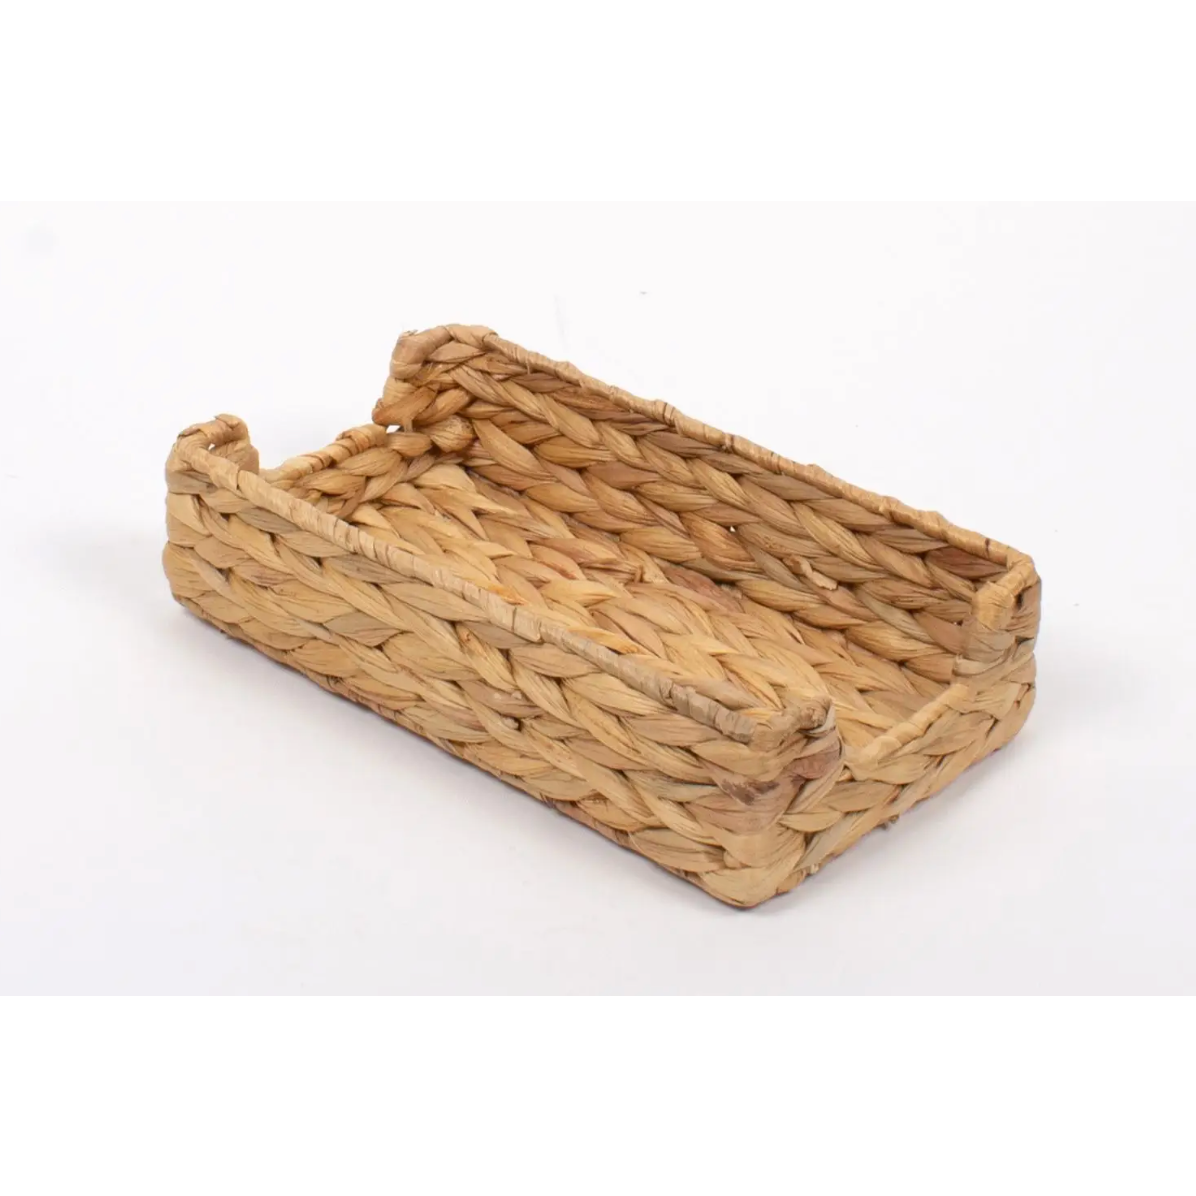 Natural rattan tray. sustainable holiday gift.